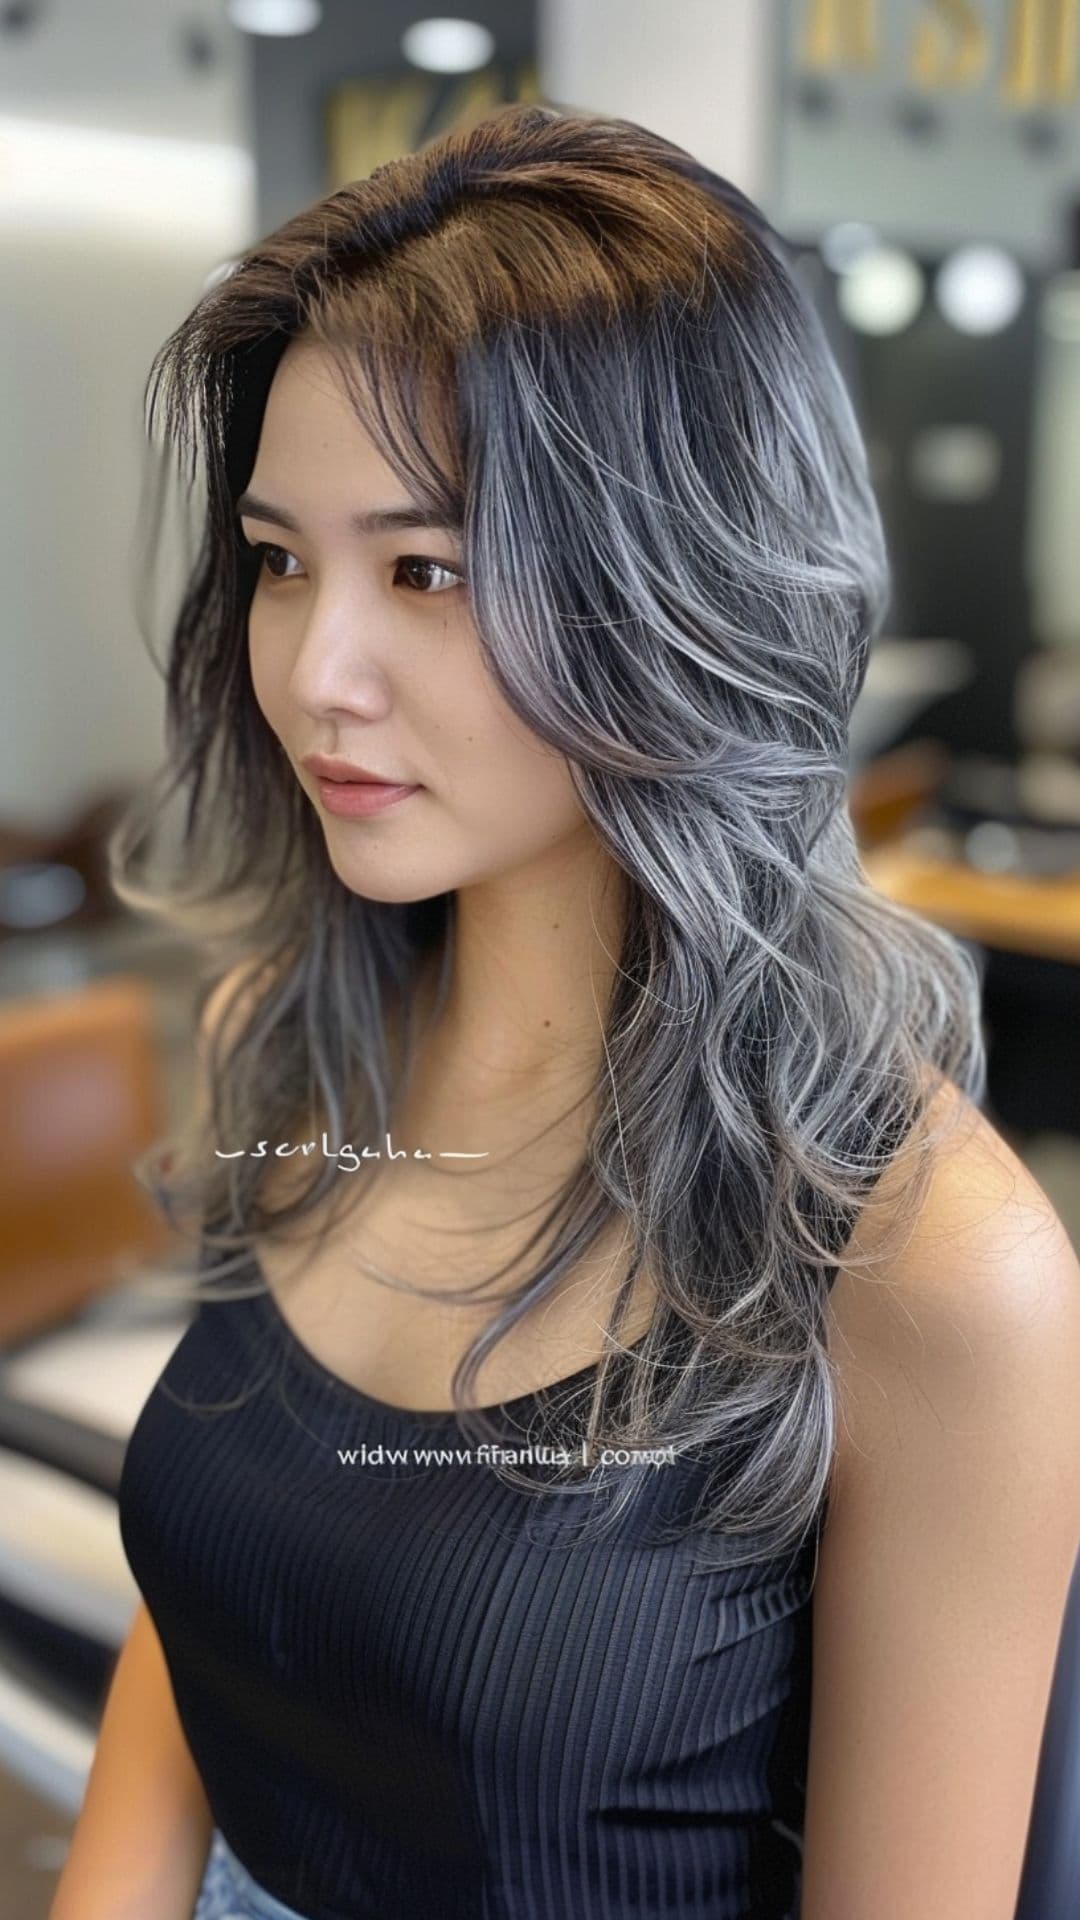 A woman modelling a soft silver highlights hair.